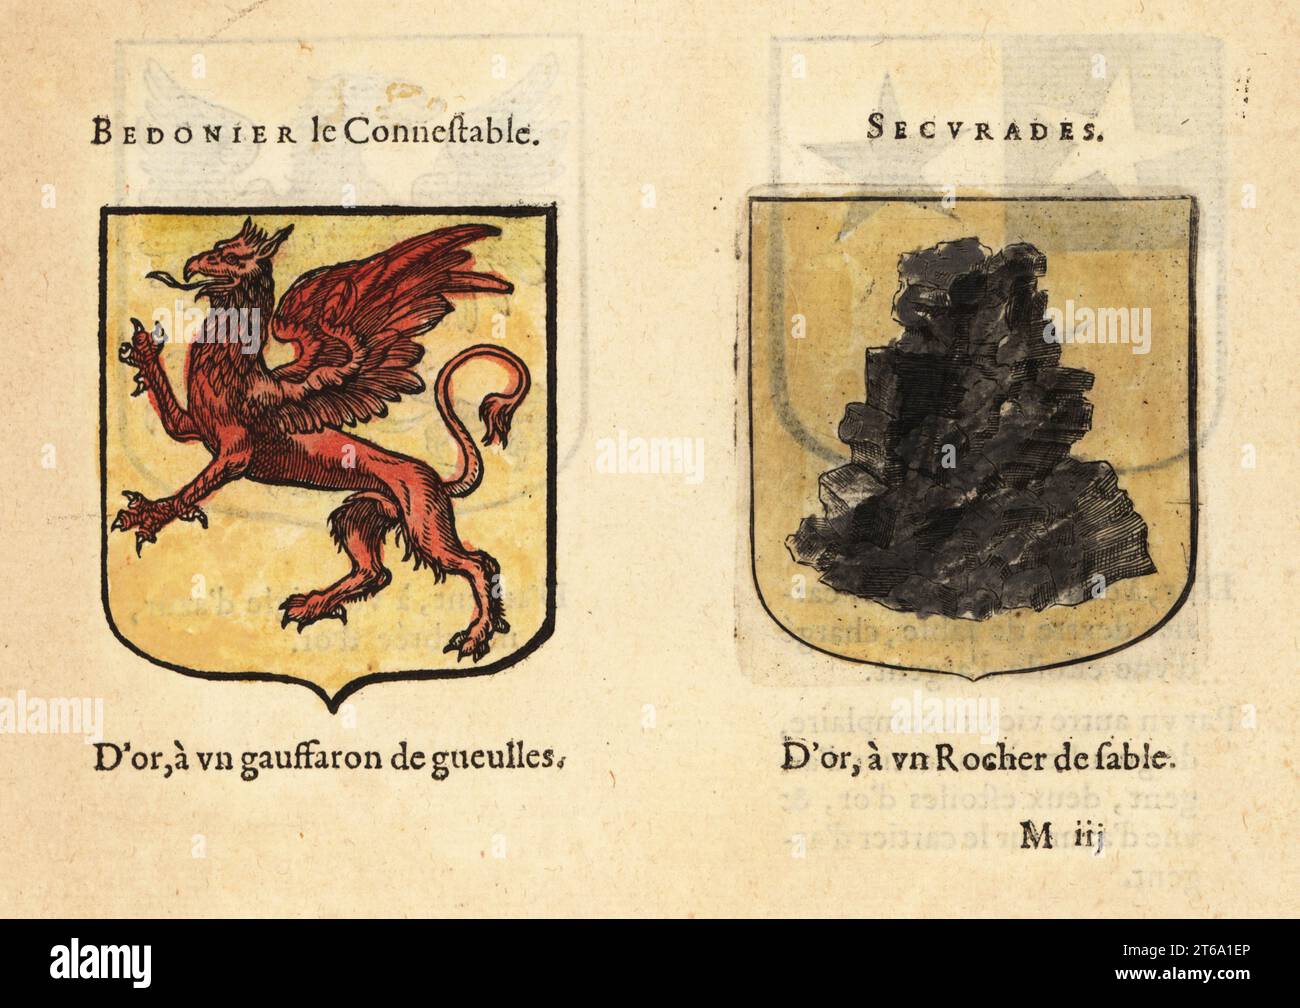 Imaginary coats of arms of the First Chapter of King Arthurs Knights of the Round Table: Bedonier the Constable with red griffon, and Segurades de Mont Grand, with black rock. Chevaliers de la table ronde: BEDONIER le Connestable, SECURADES. Handcoloured woodblock engraving from Hierosme de Baras Le Blason des Armoiries, Chez Rolet Boutonne, Paris, 1628. Stock Photo